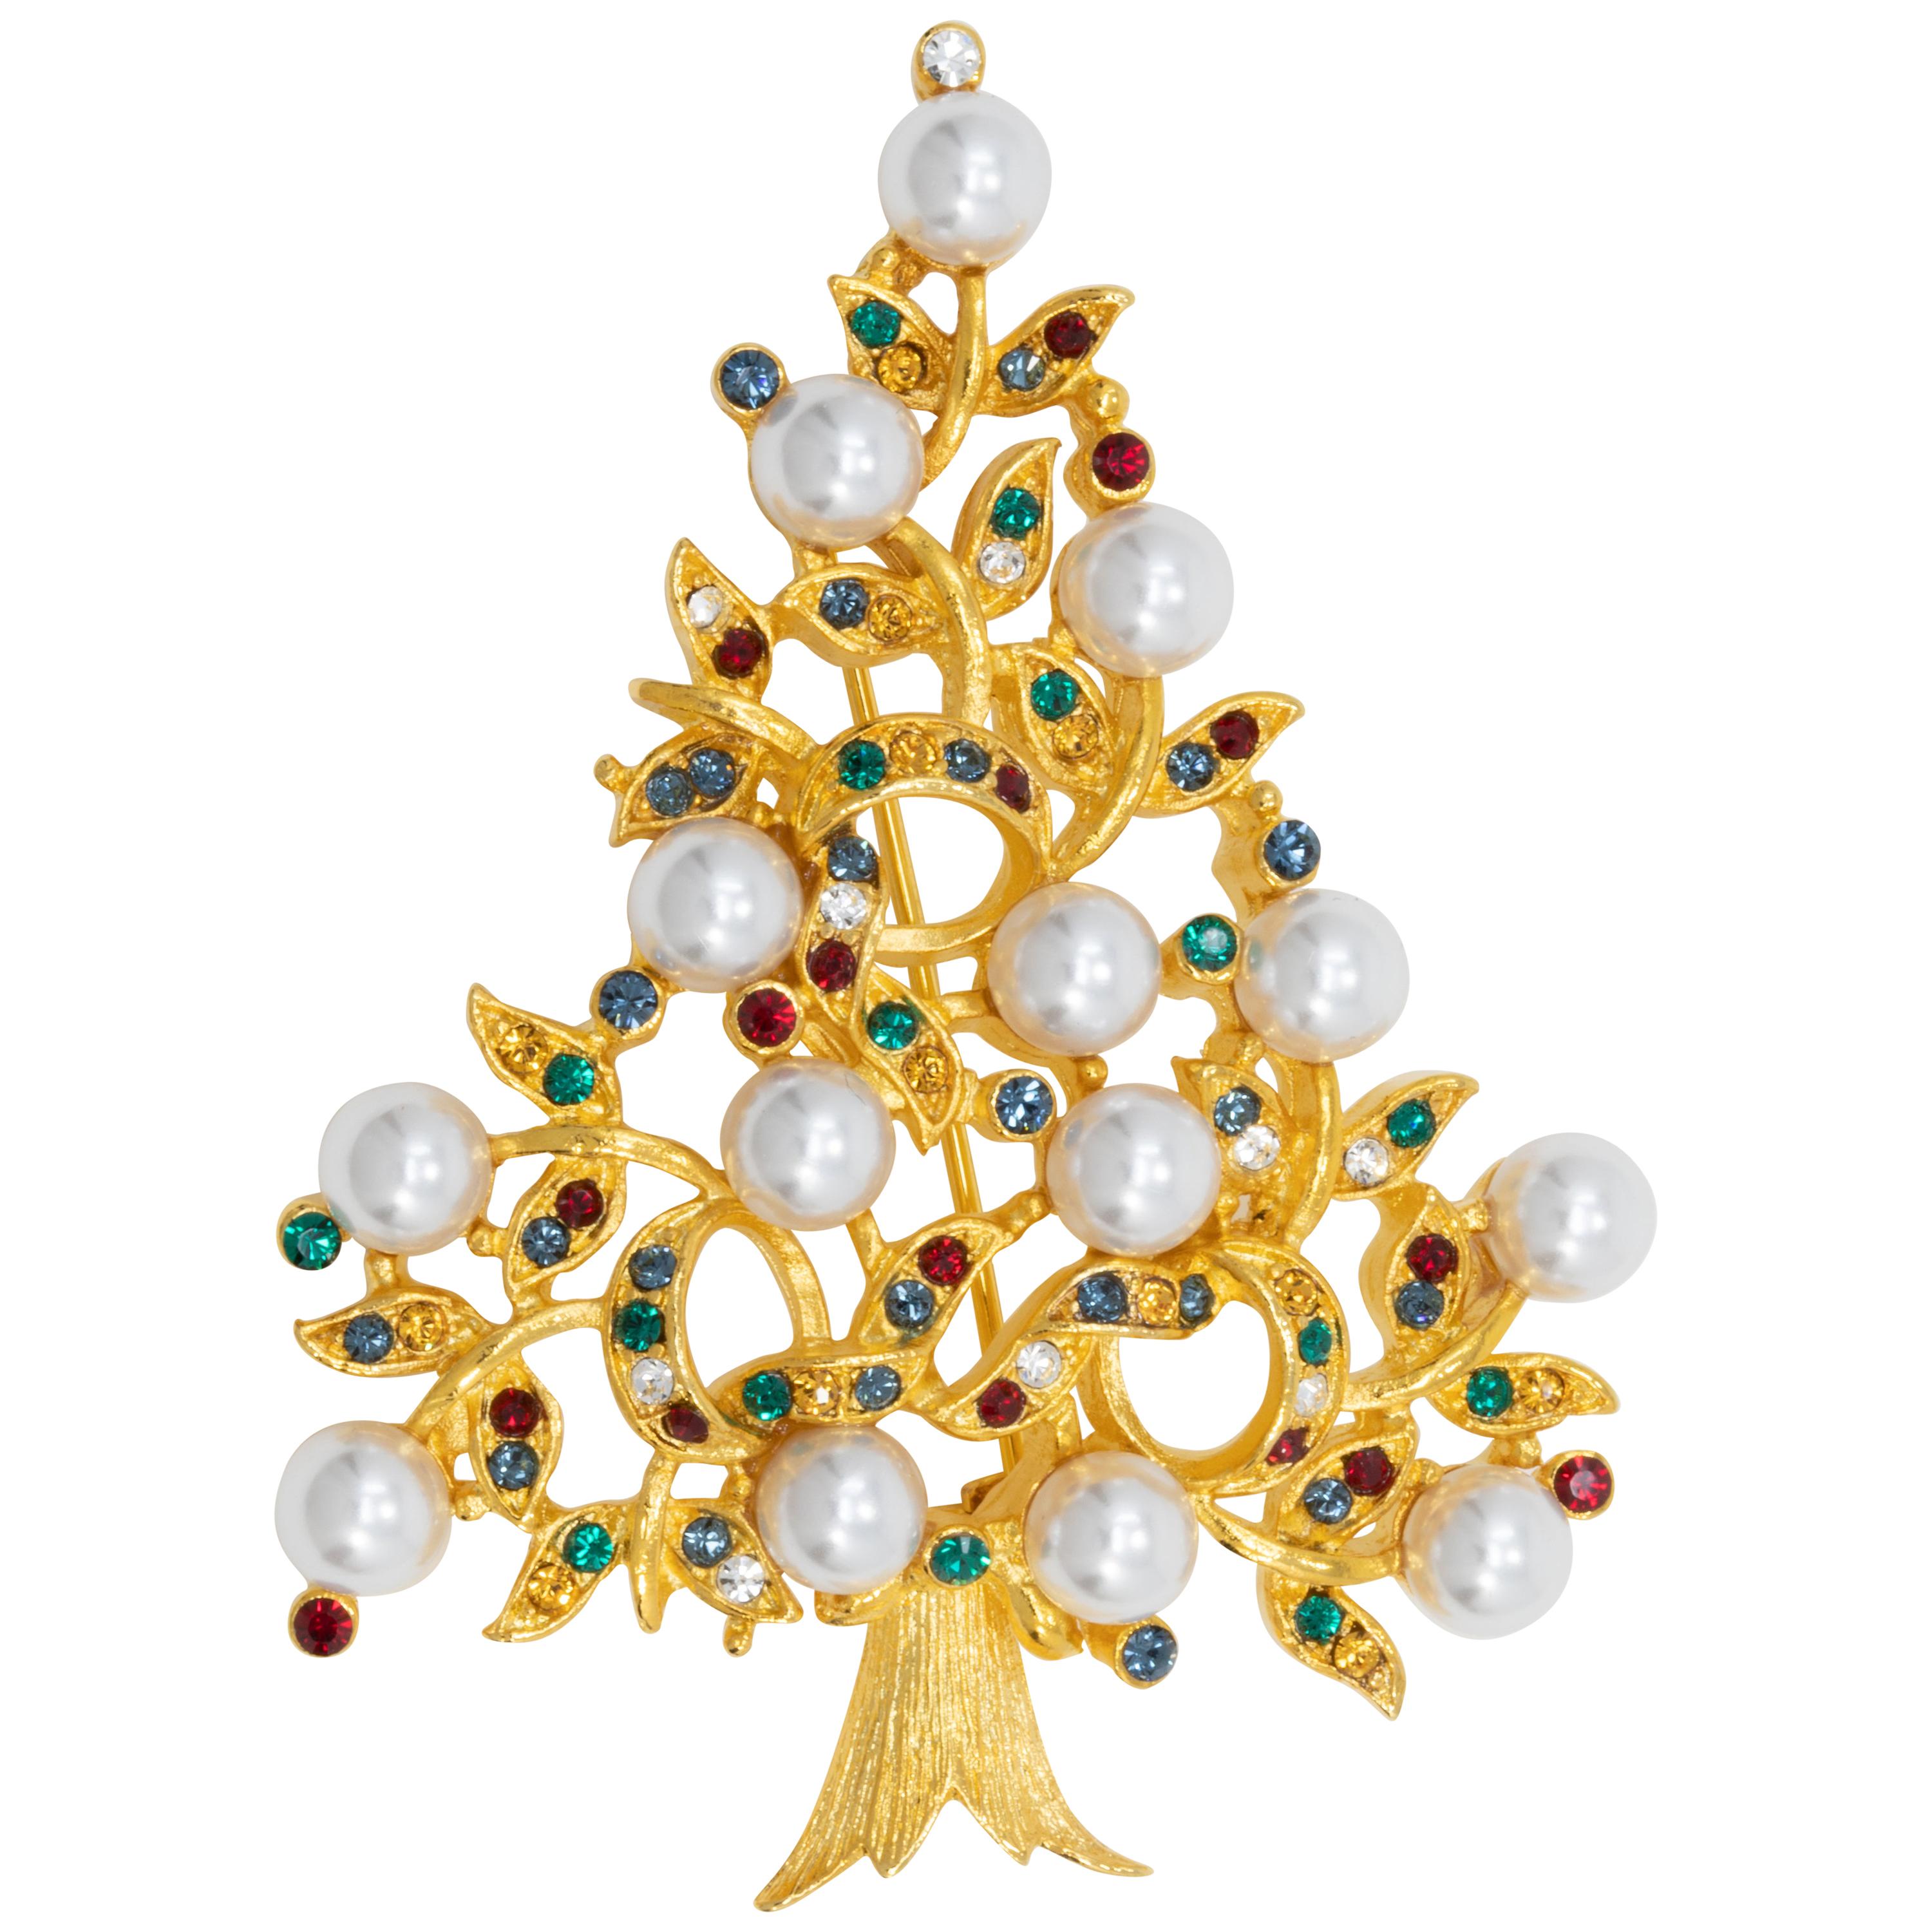 LIA Gold Christmas Tree Brooch, Festive Faux Pearl Crystal Decorated Conifer Pin